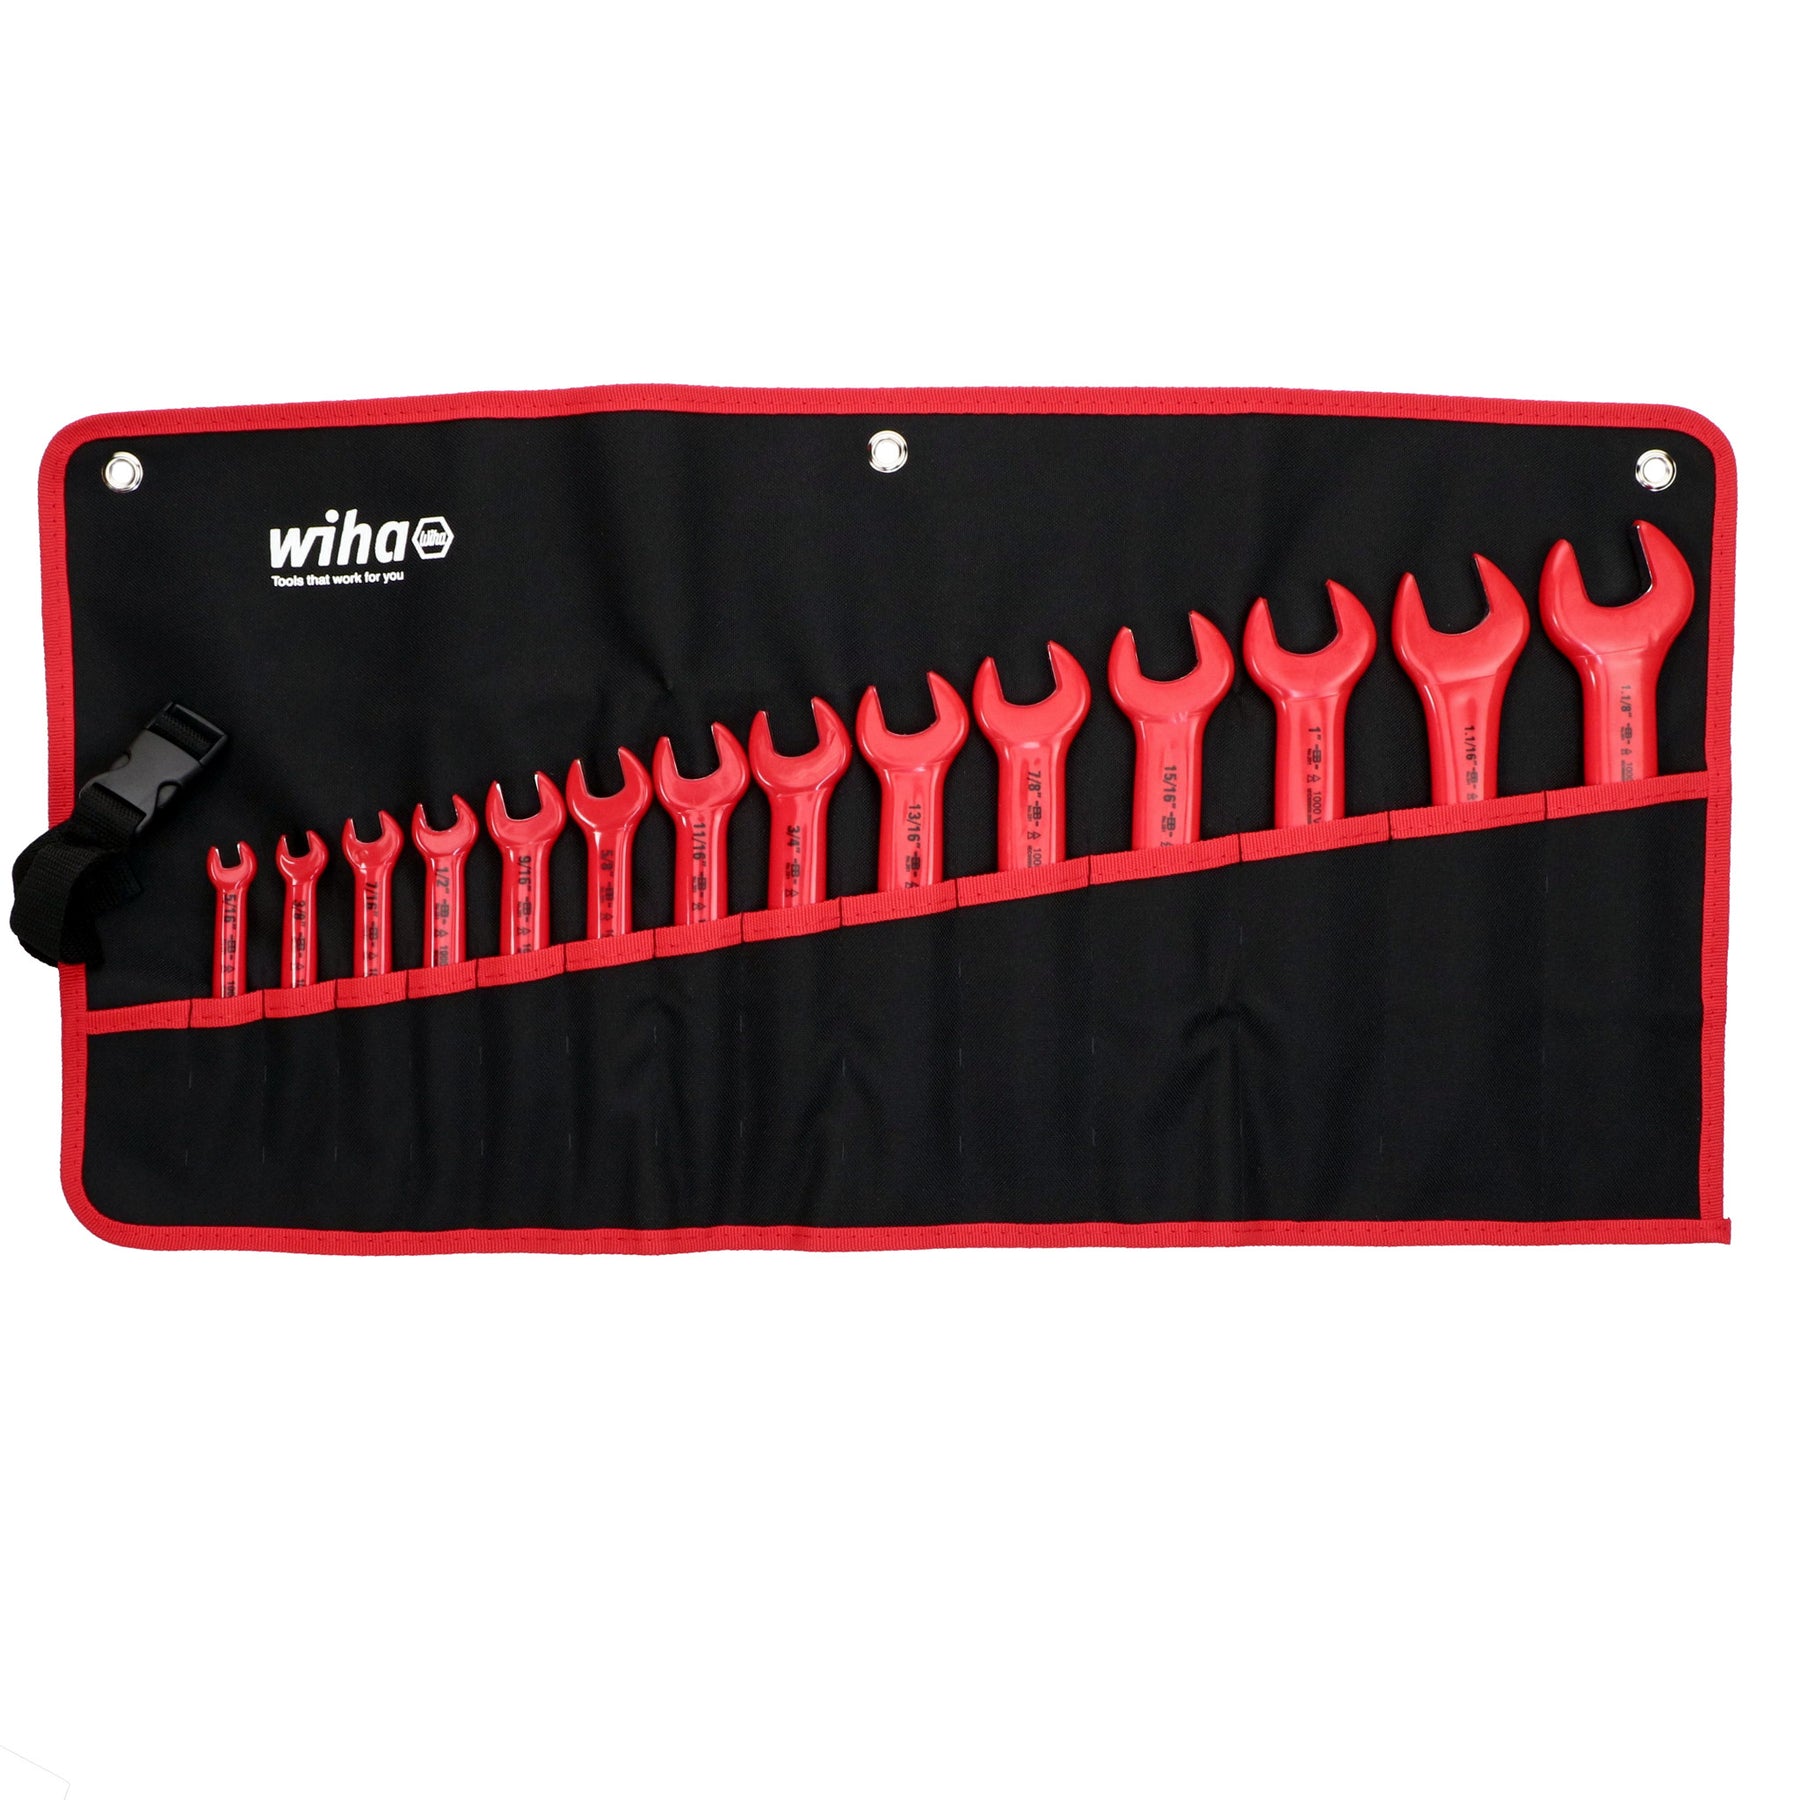 Wiha 20190 14 Piece Insulated Open End Wrench Set - SAE